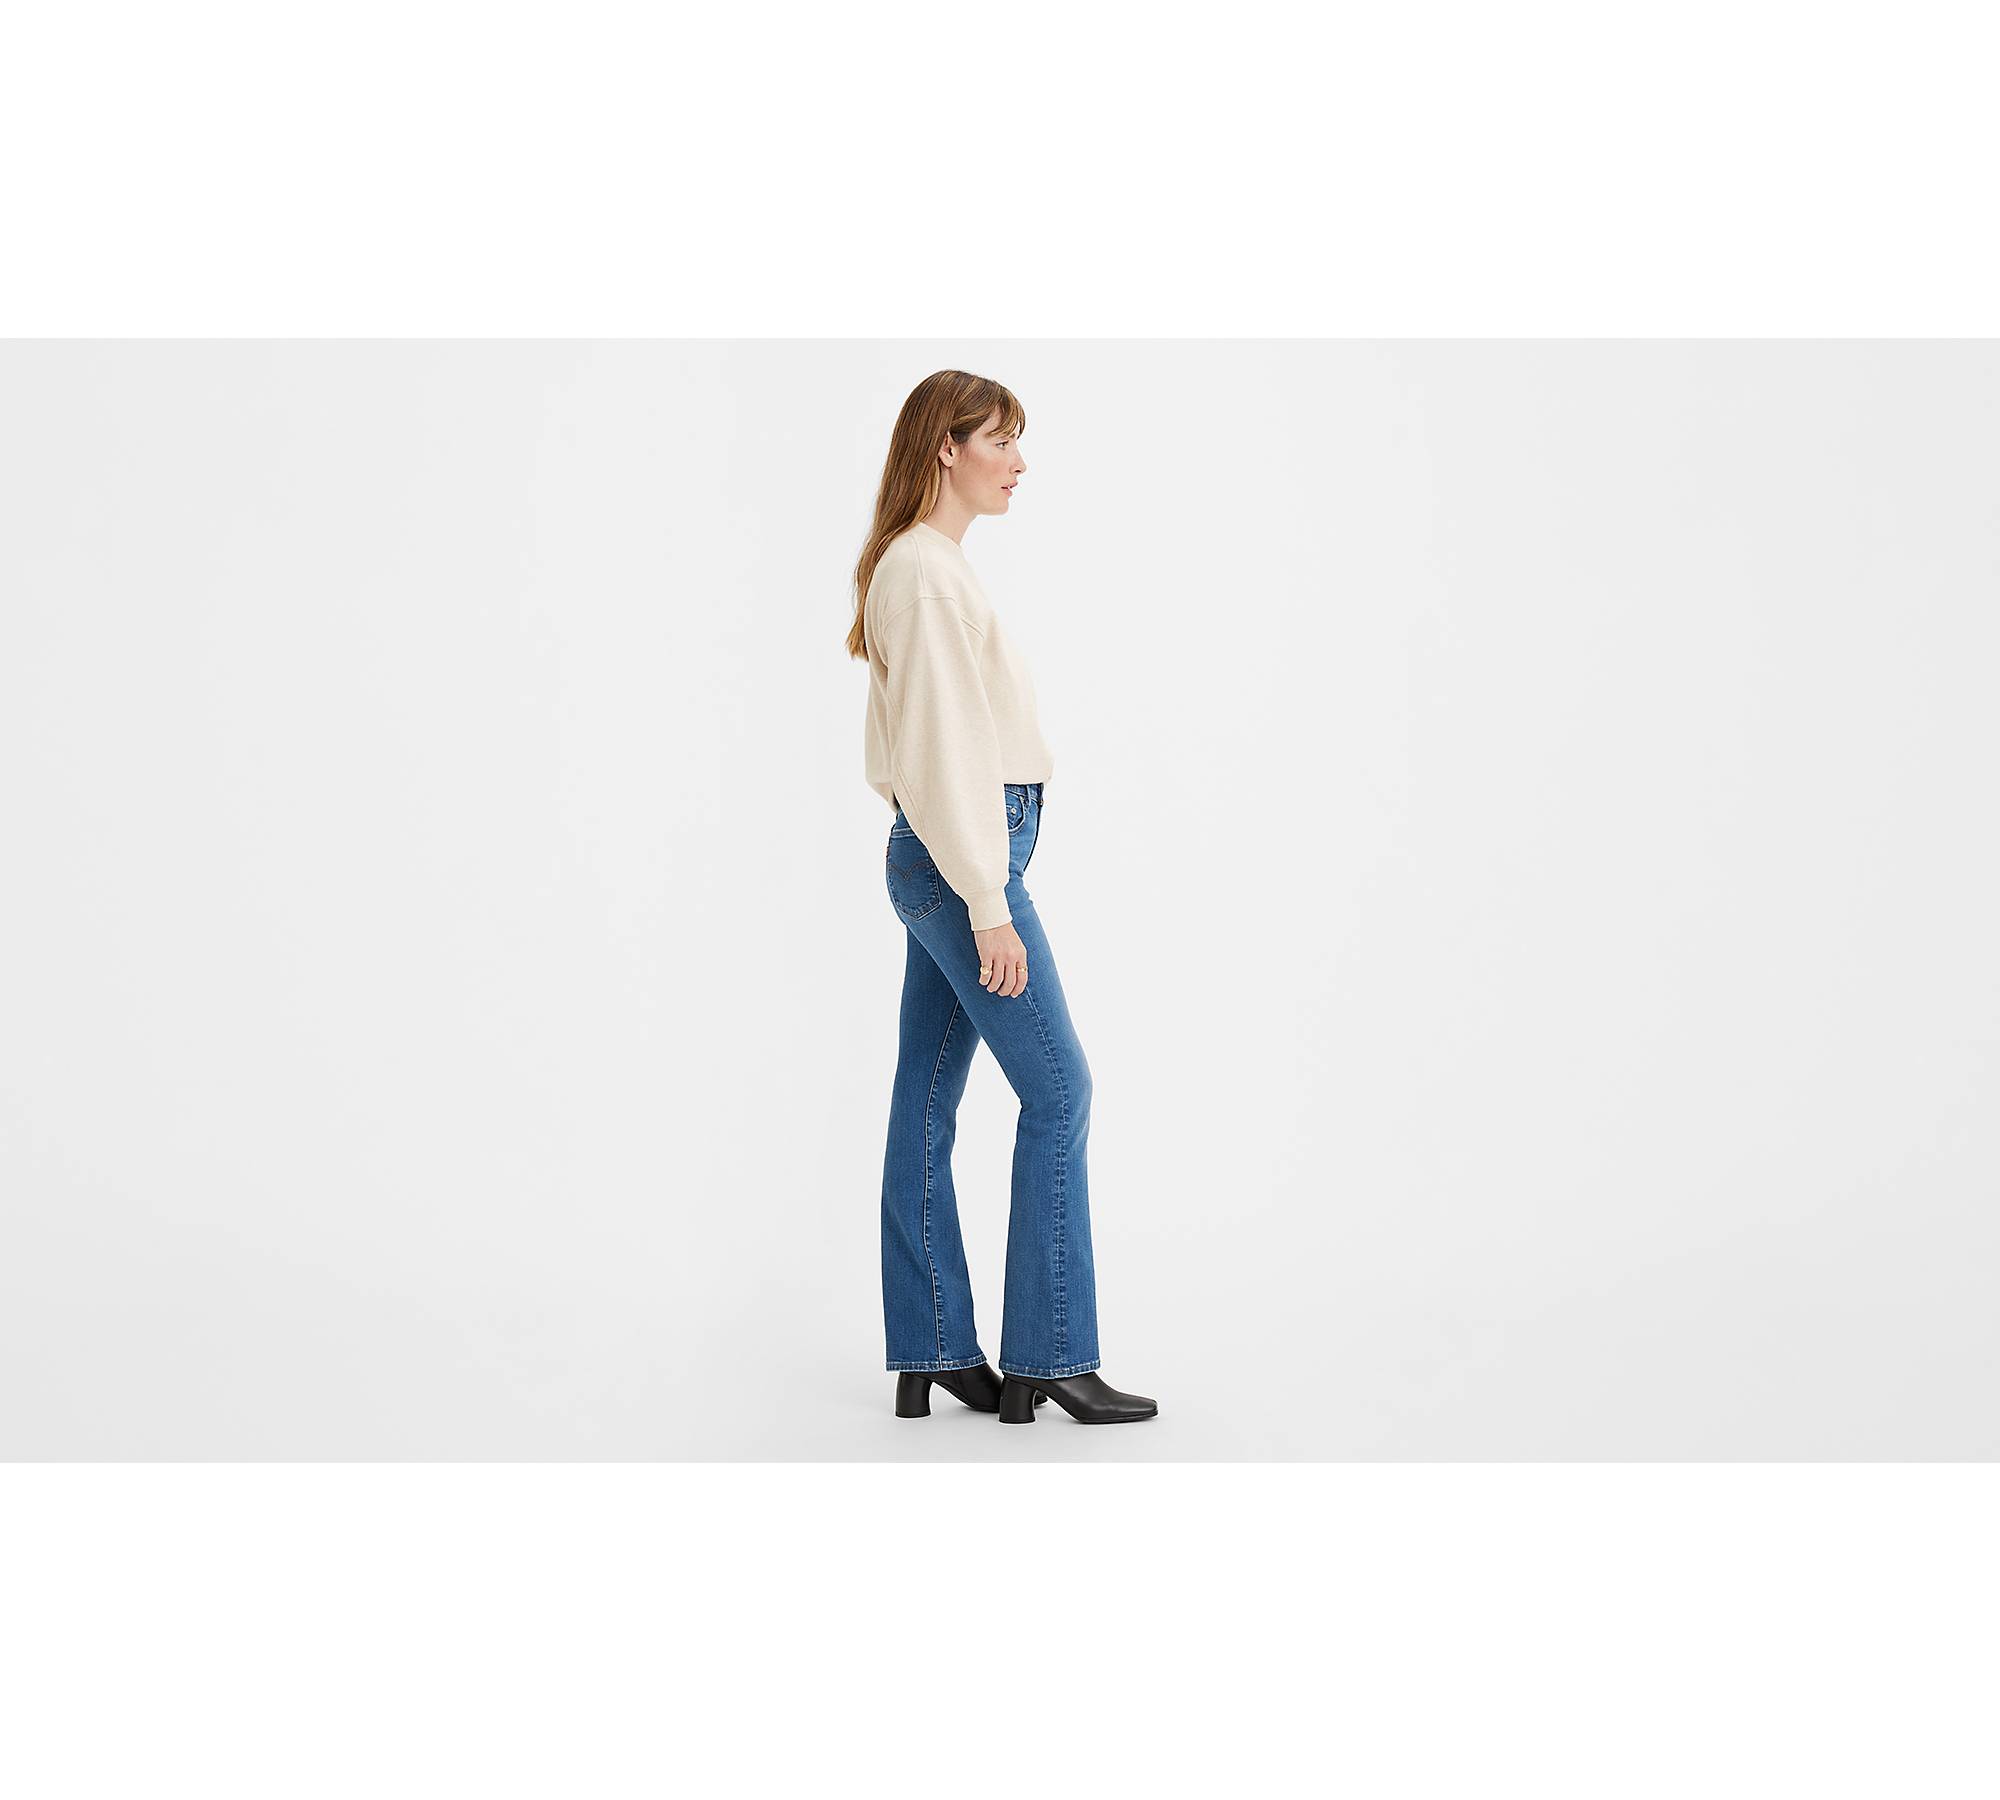 LEVI'S 725 High Rise Boot Cut Jeans in Blow Your Mind